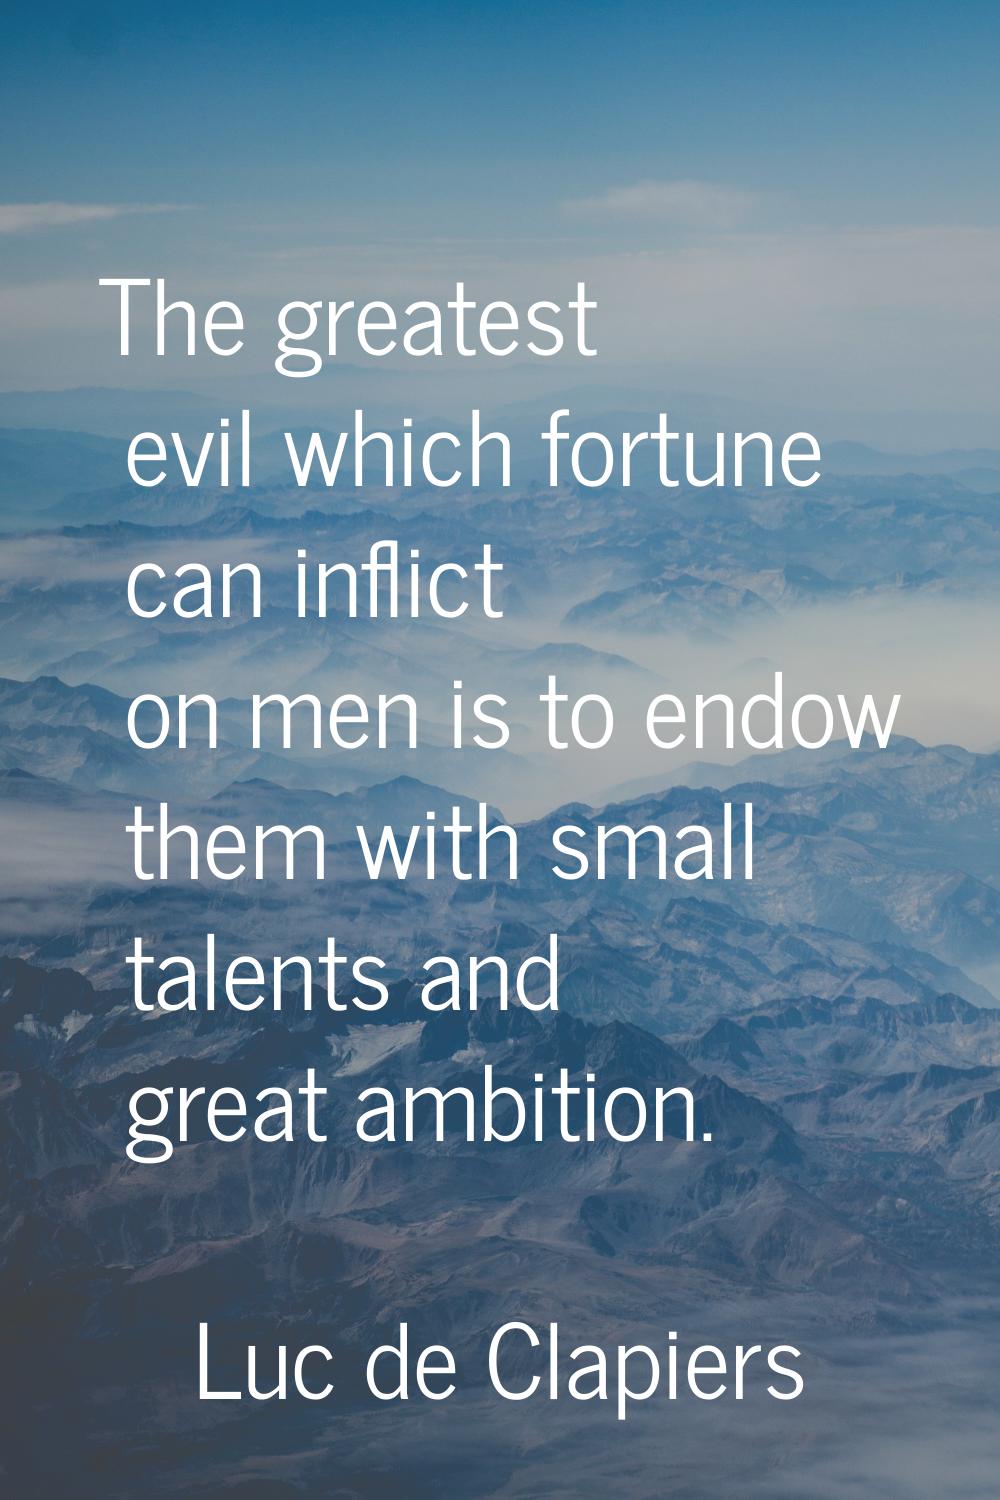 The greatest evil which fortune can inflict on men is to endow them with small talents and great am